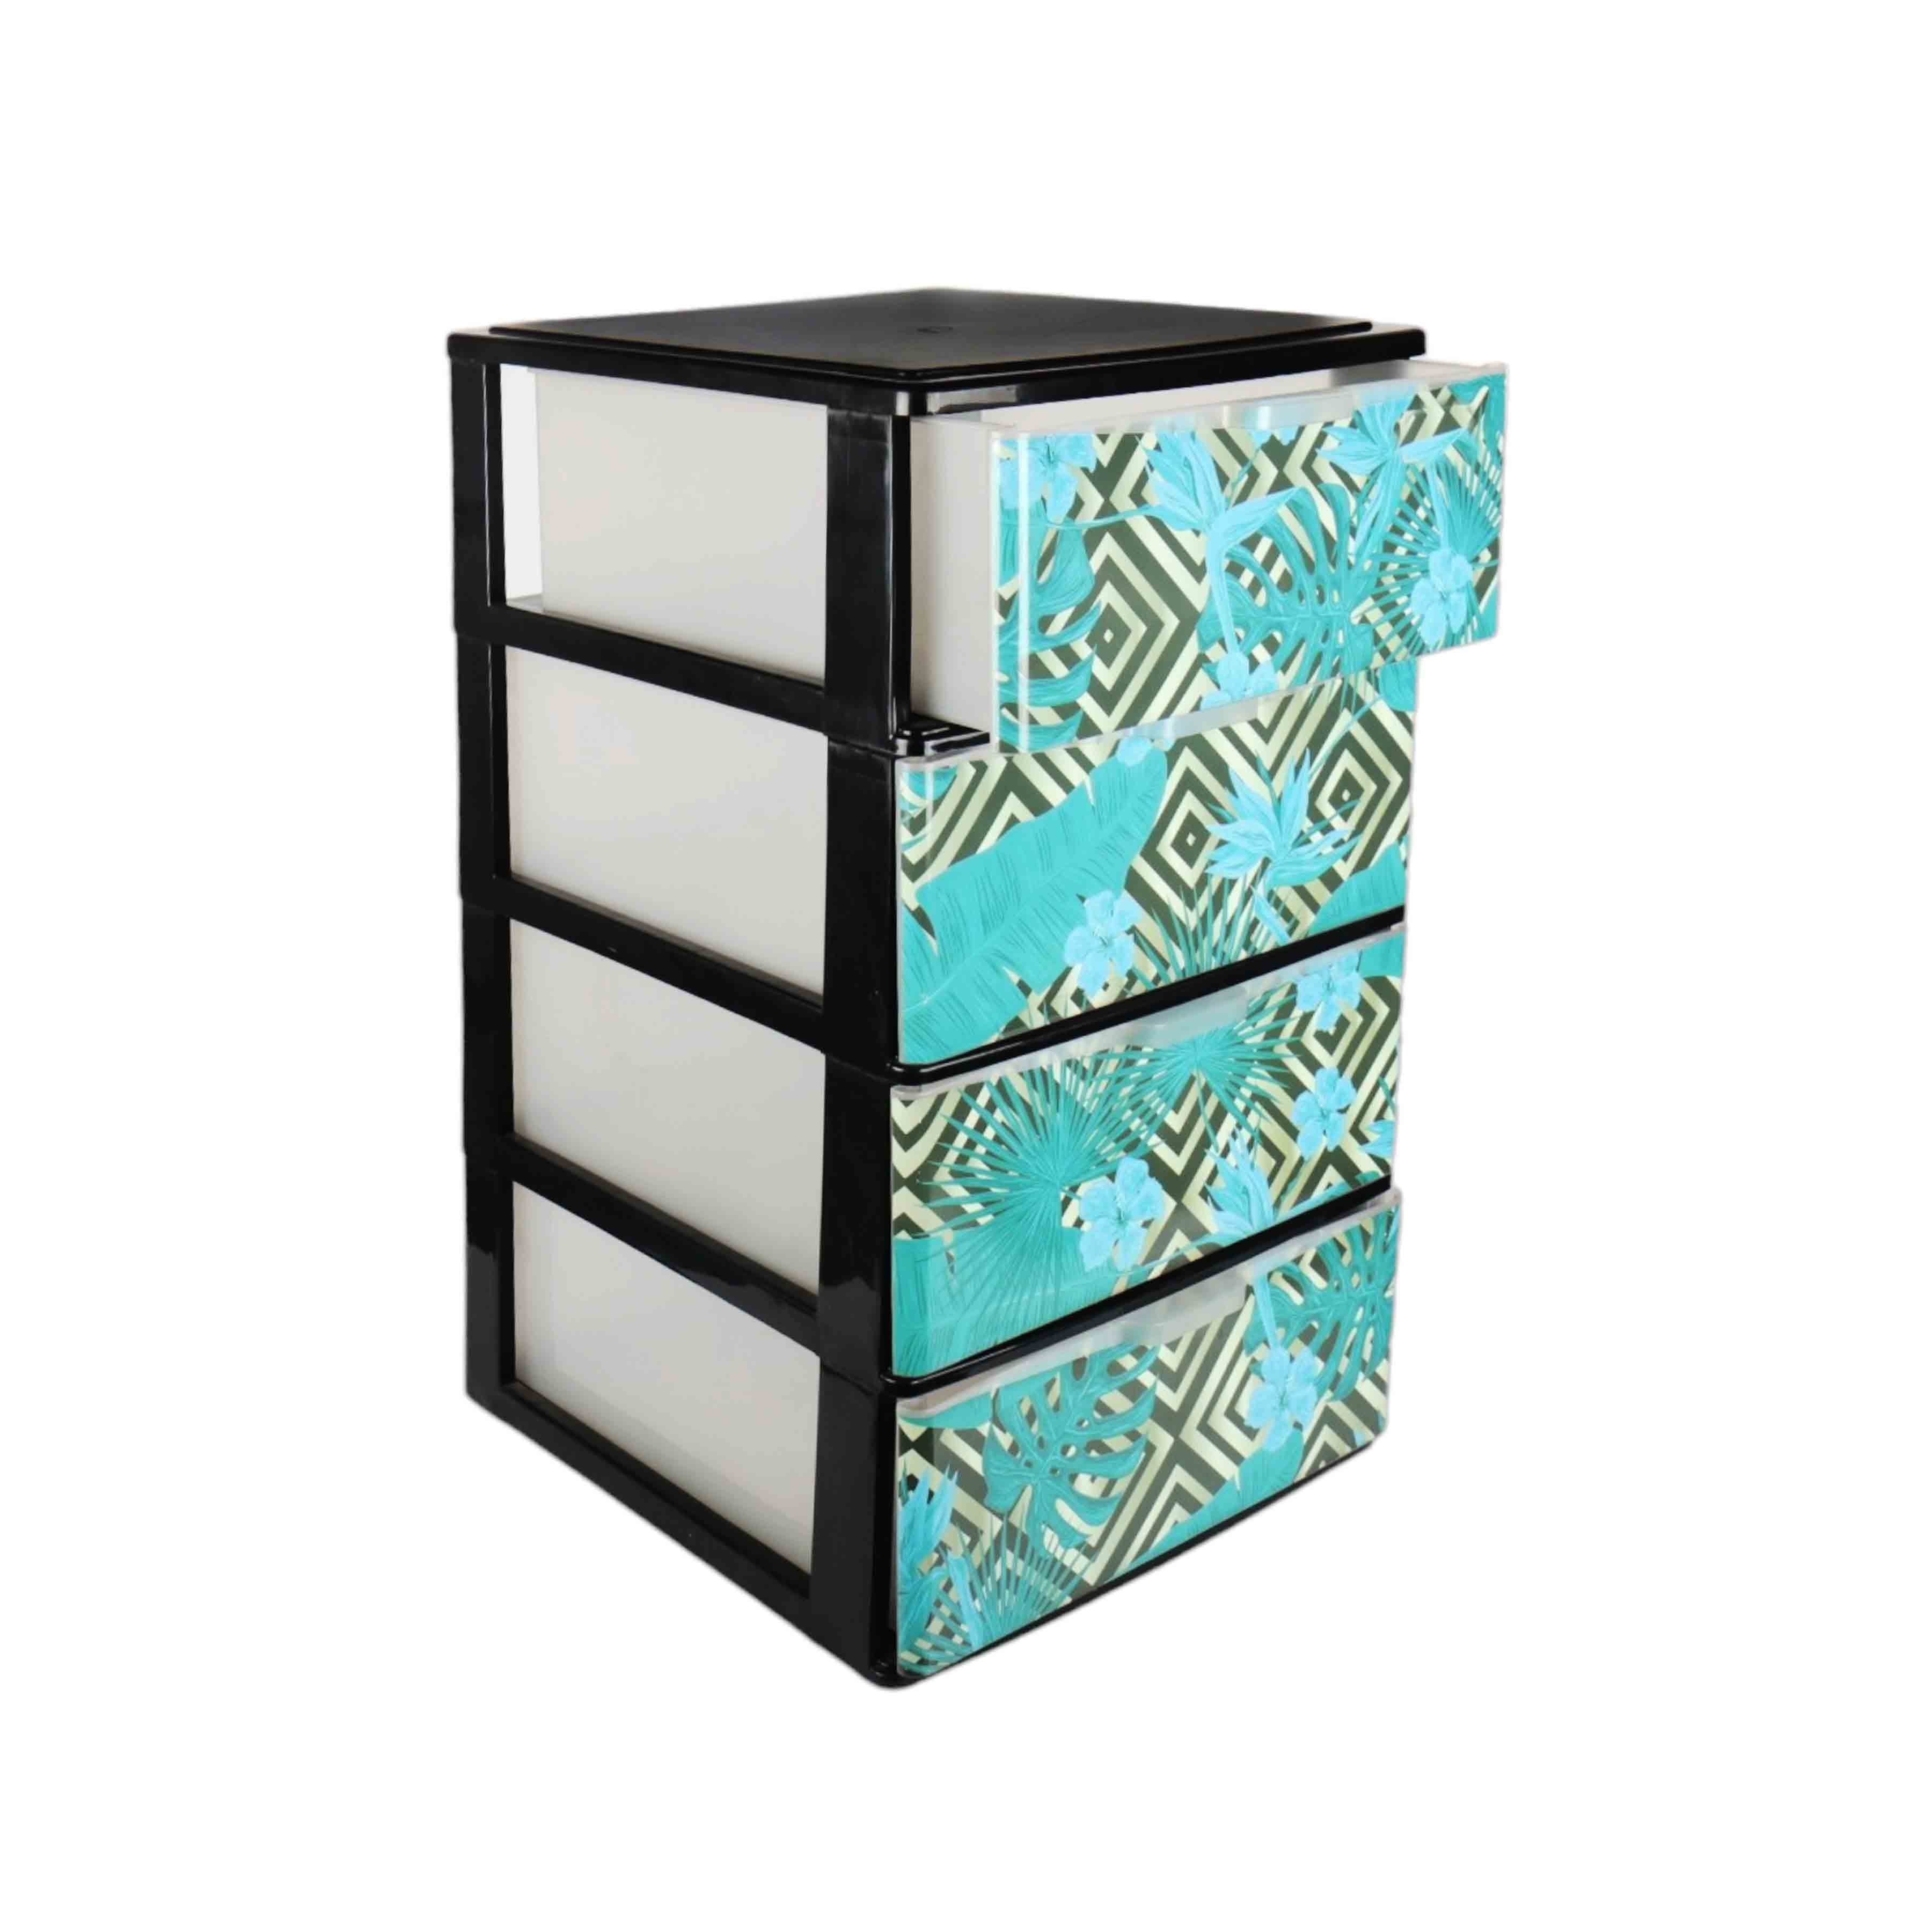 Nu Ware Storage 4 Drawer with Leaves Print 380x370x626